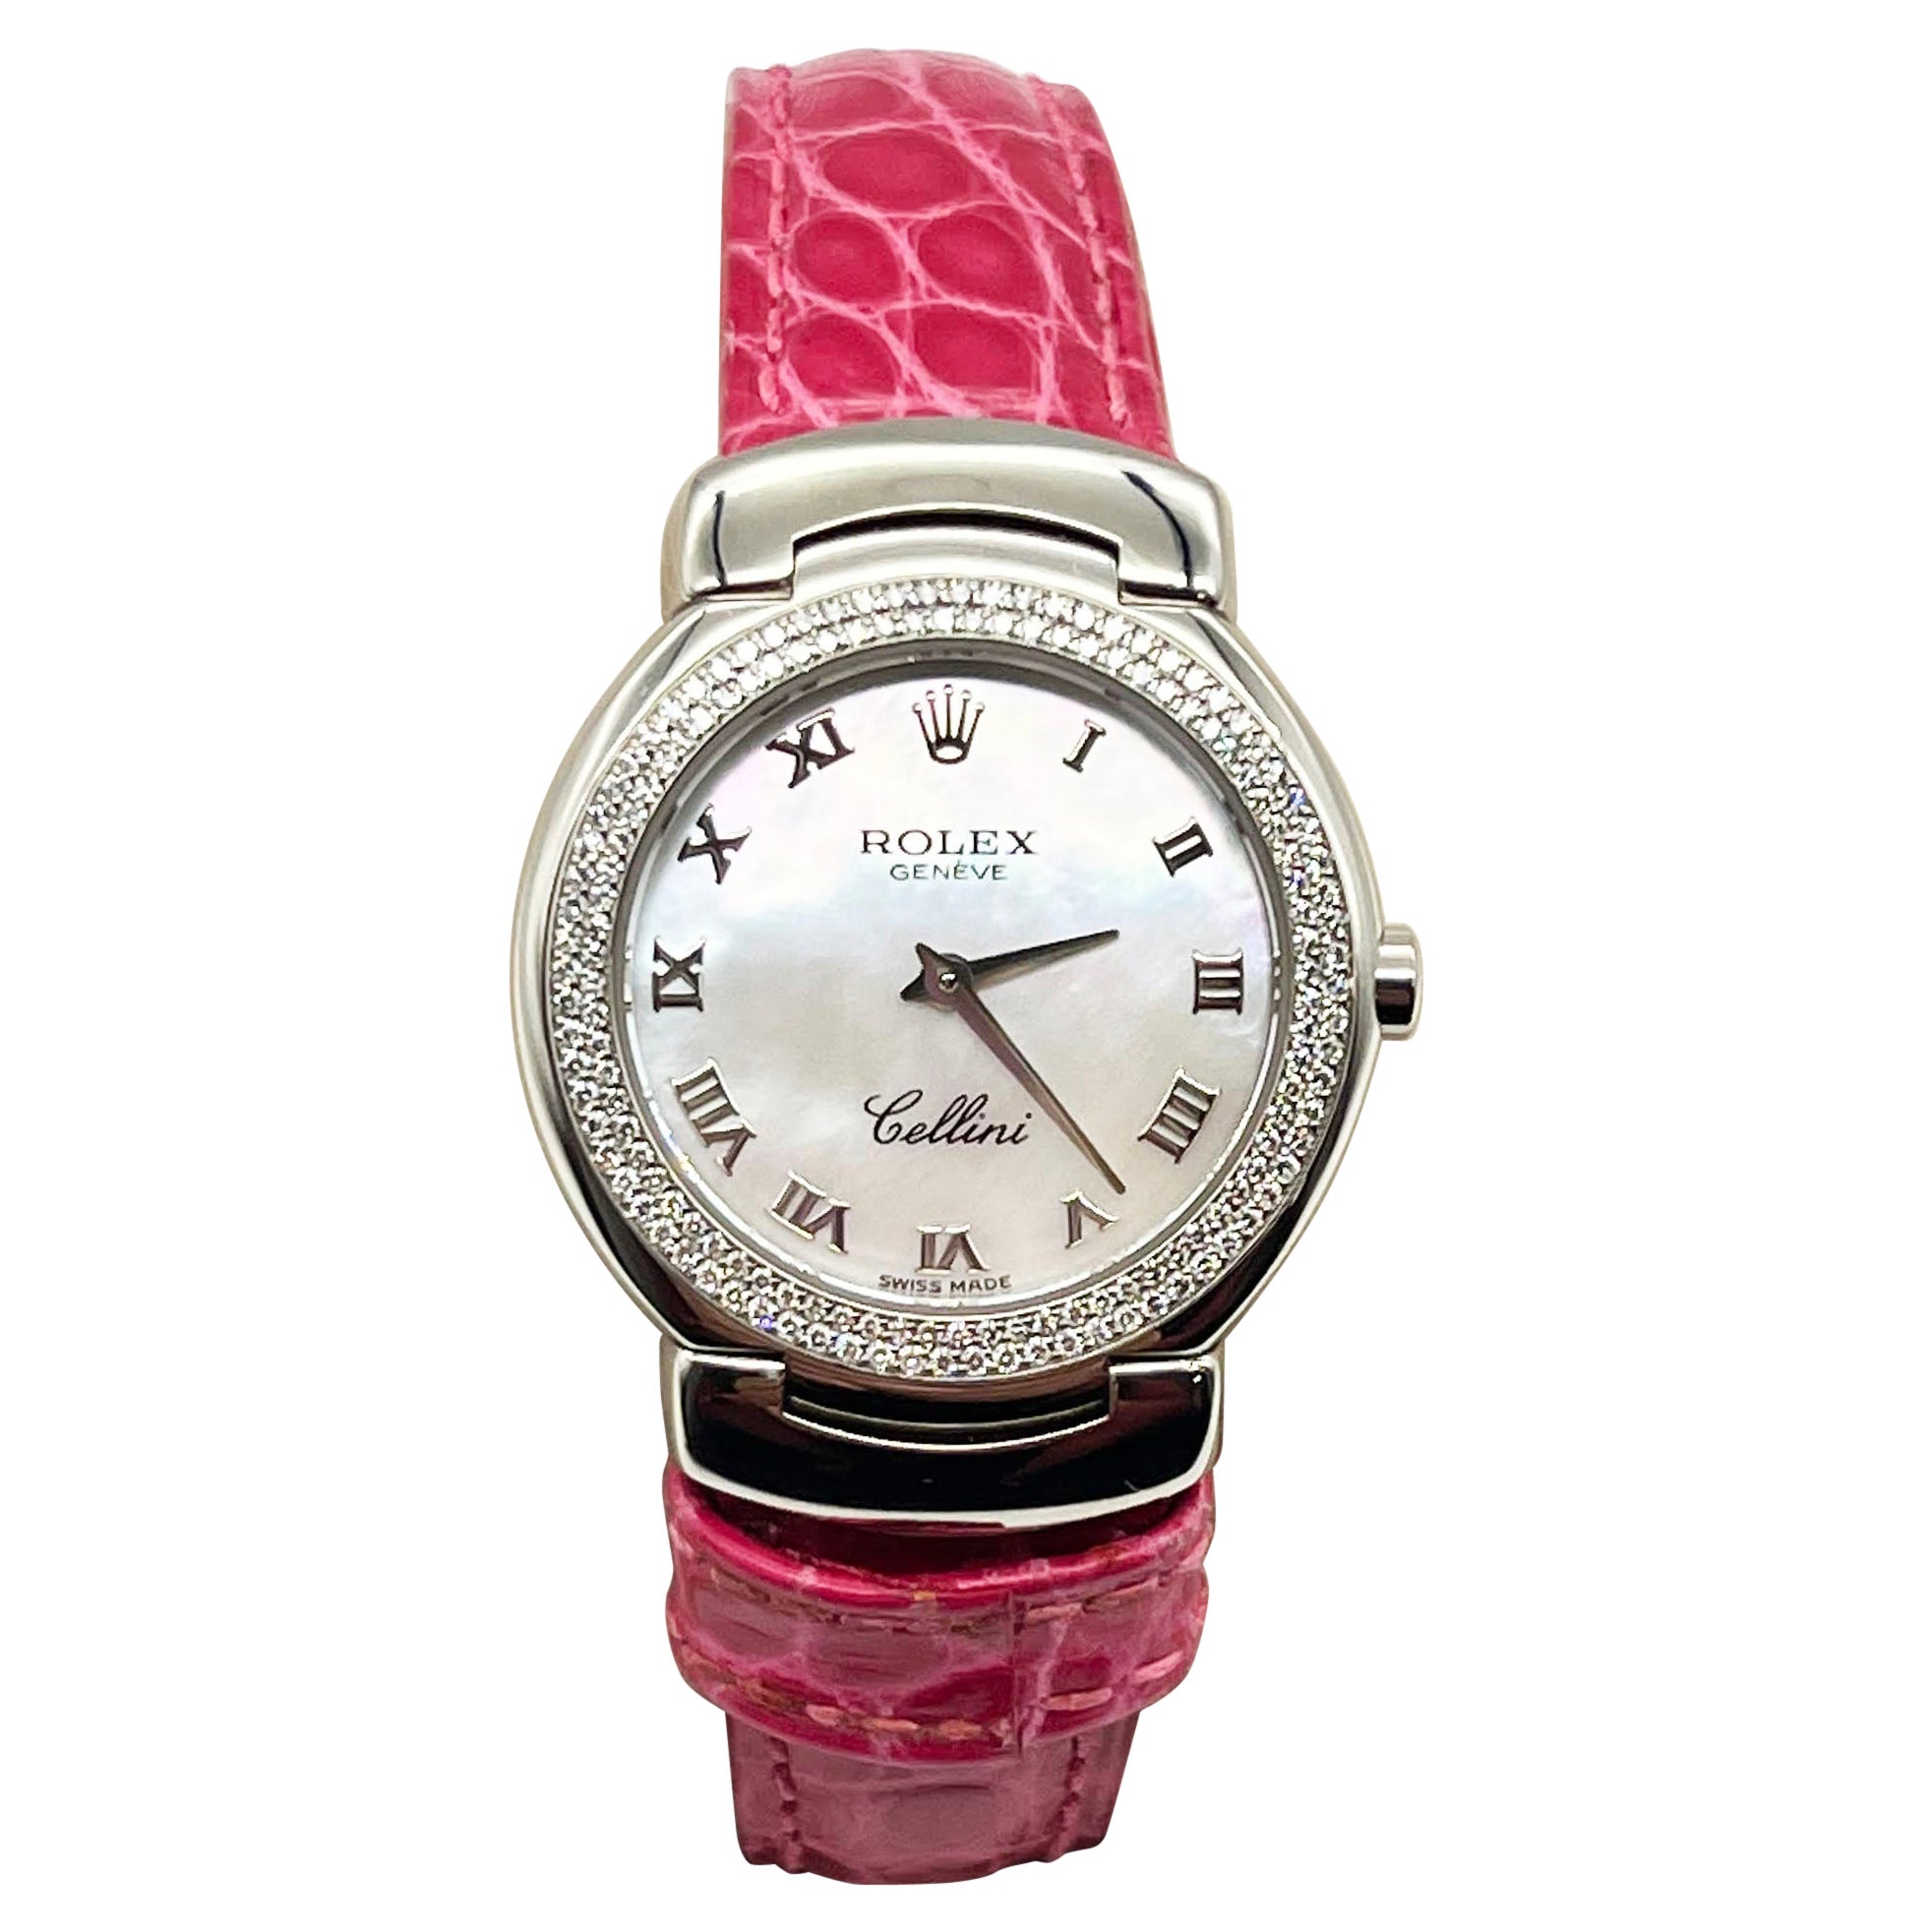 Rolex 6671 Cellini Cellissima MOP Roman Dial 18K White Gold Pink Leather Strap For Sale